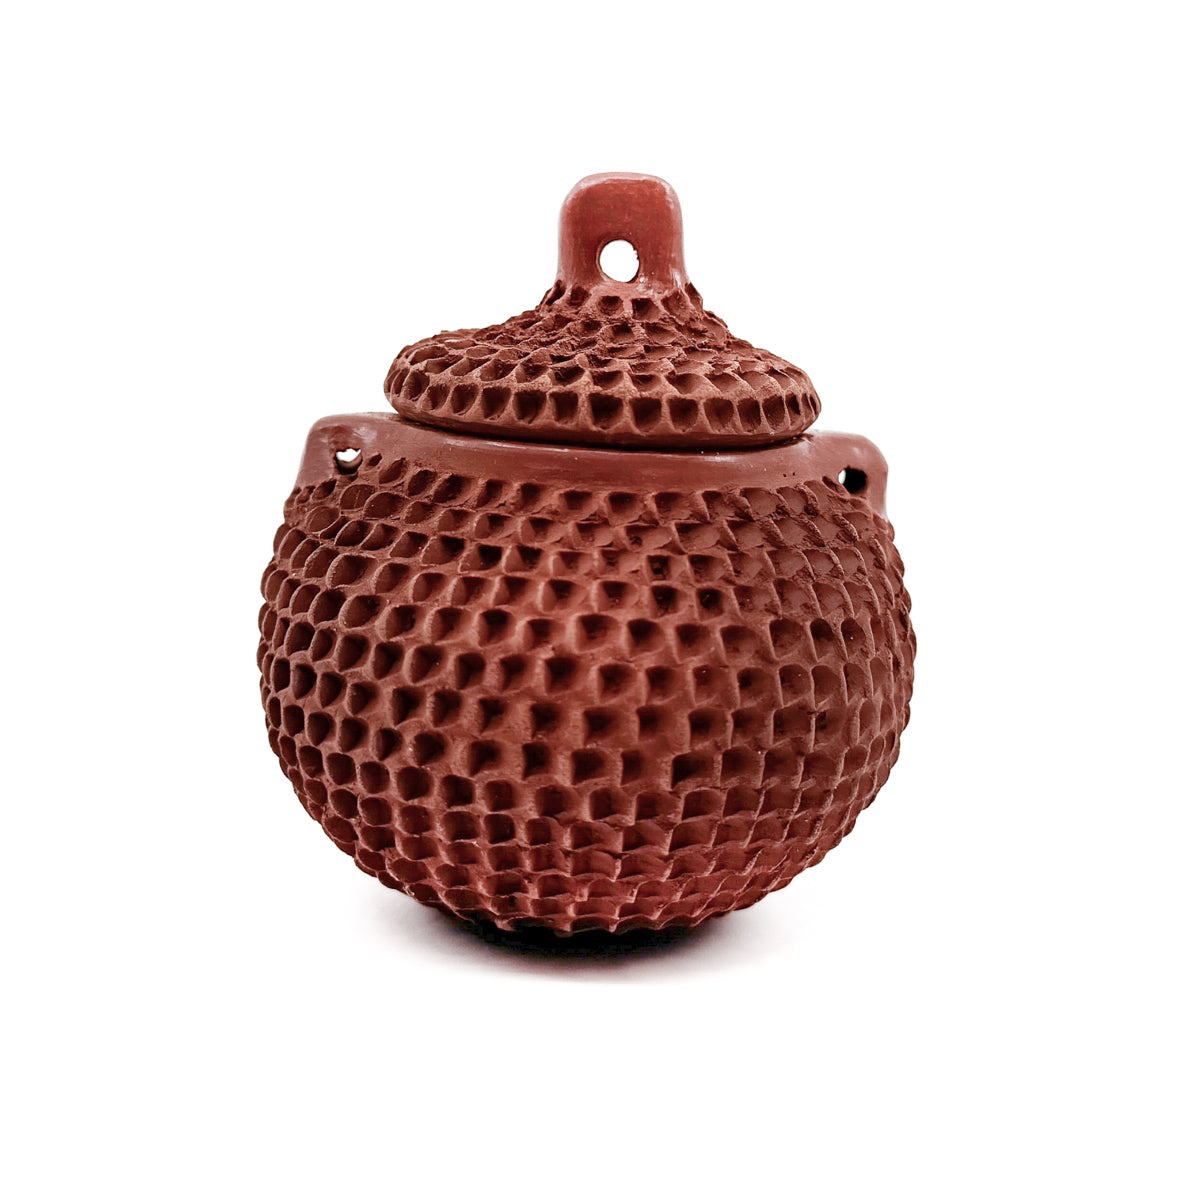 Textured Pot with Handles and Lid